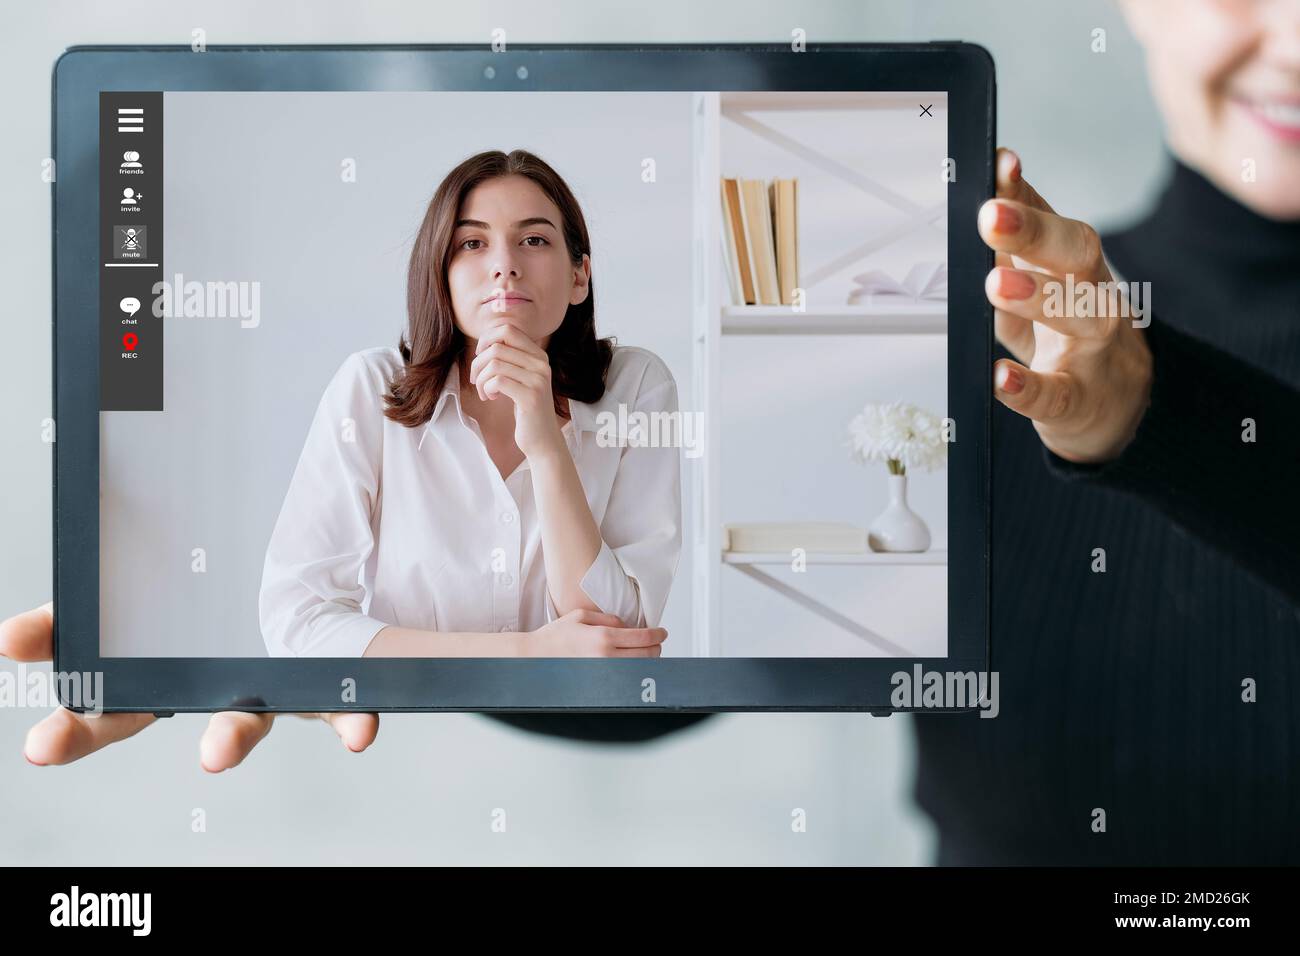 coaching online video chat donna esperto sul tablet Foto Stock